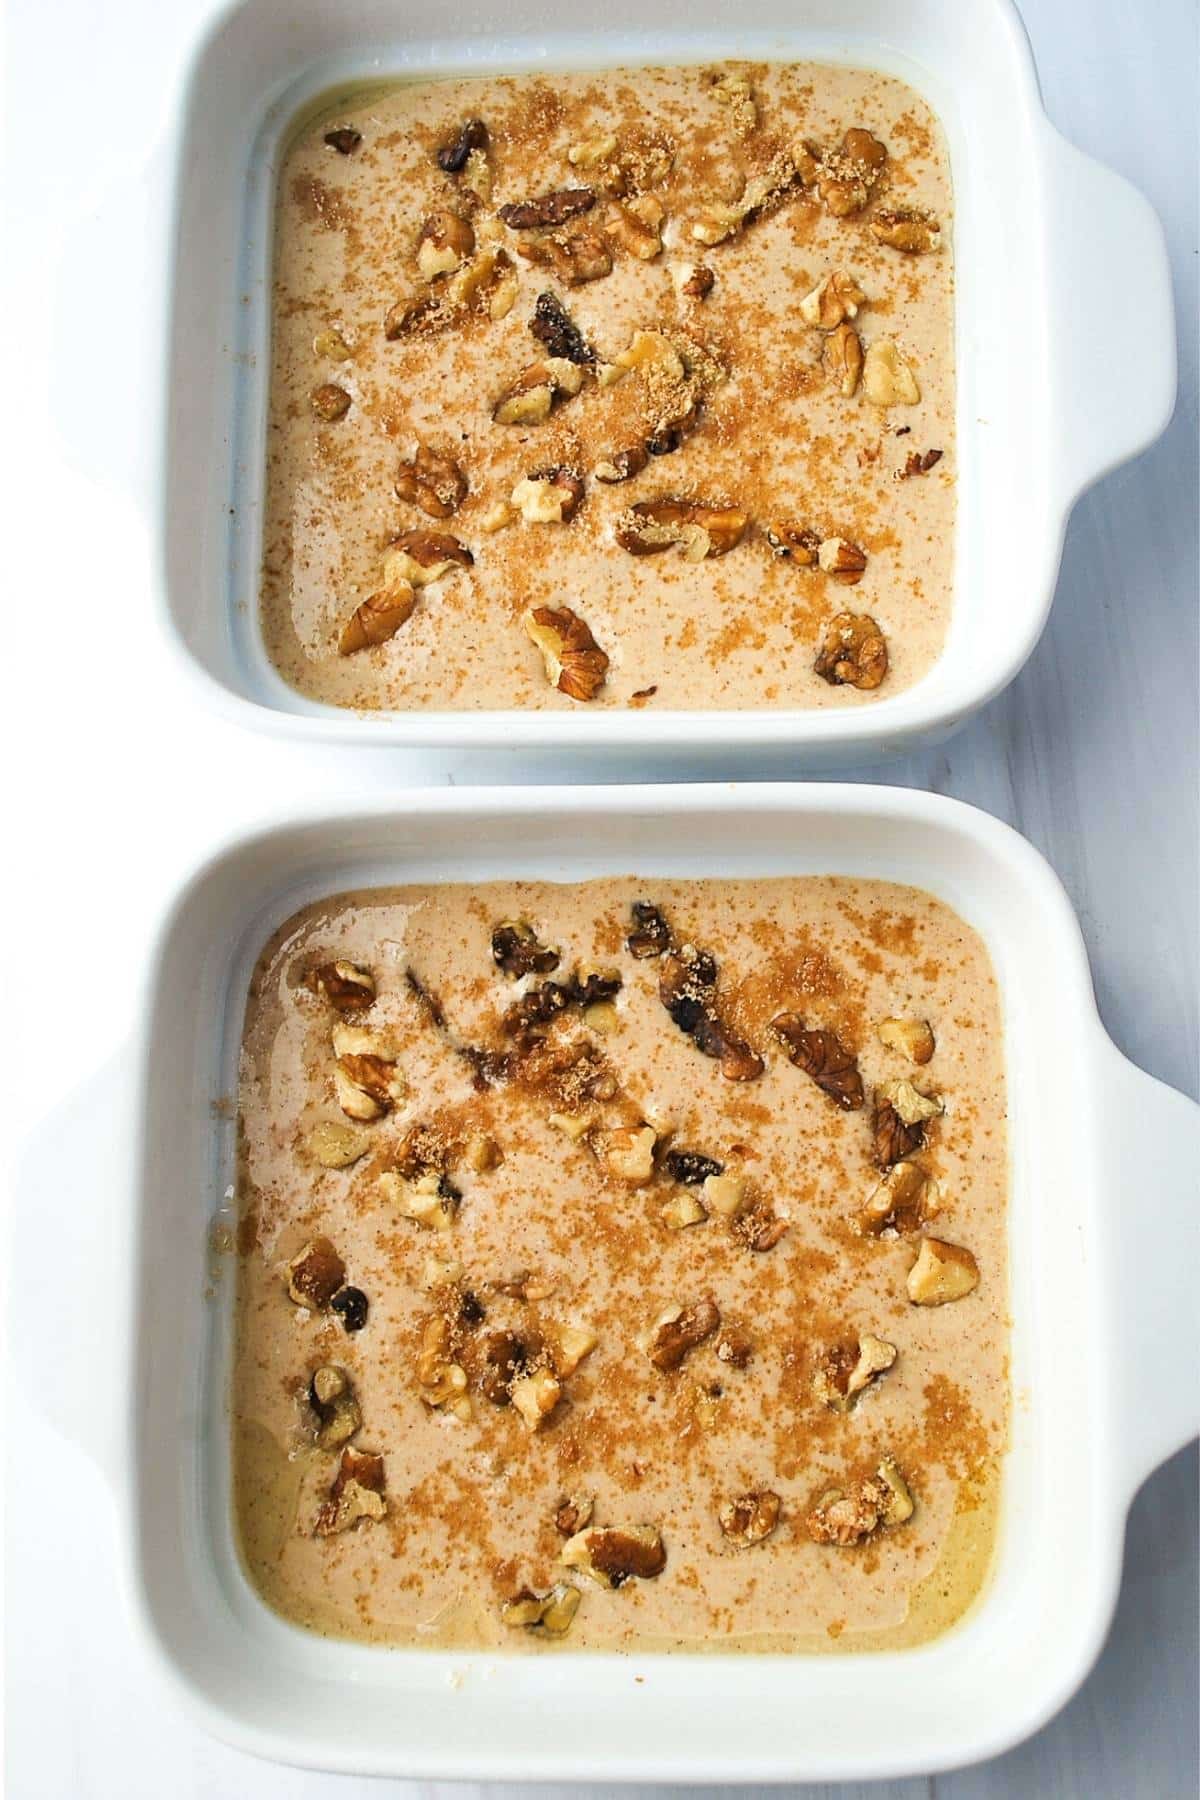 apple pie baked oats batter in 2 baking dishes topped with nuts and brown sugar